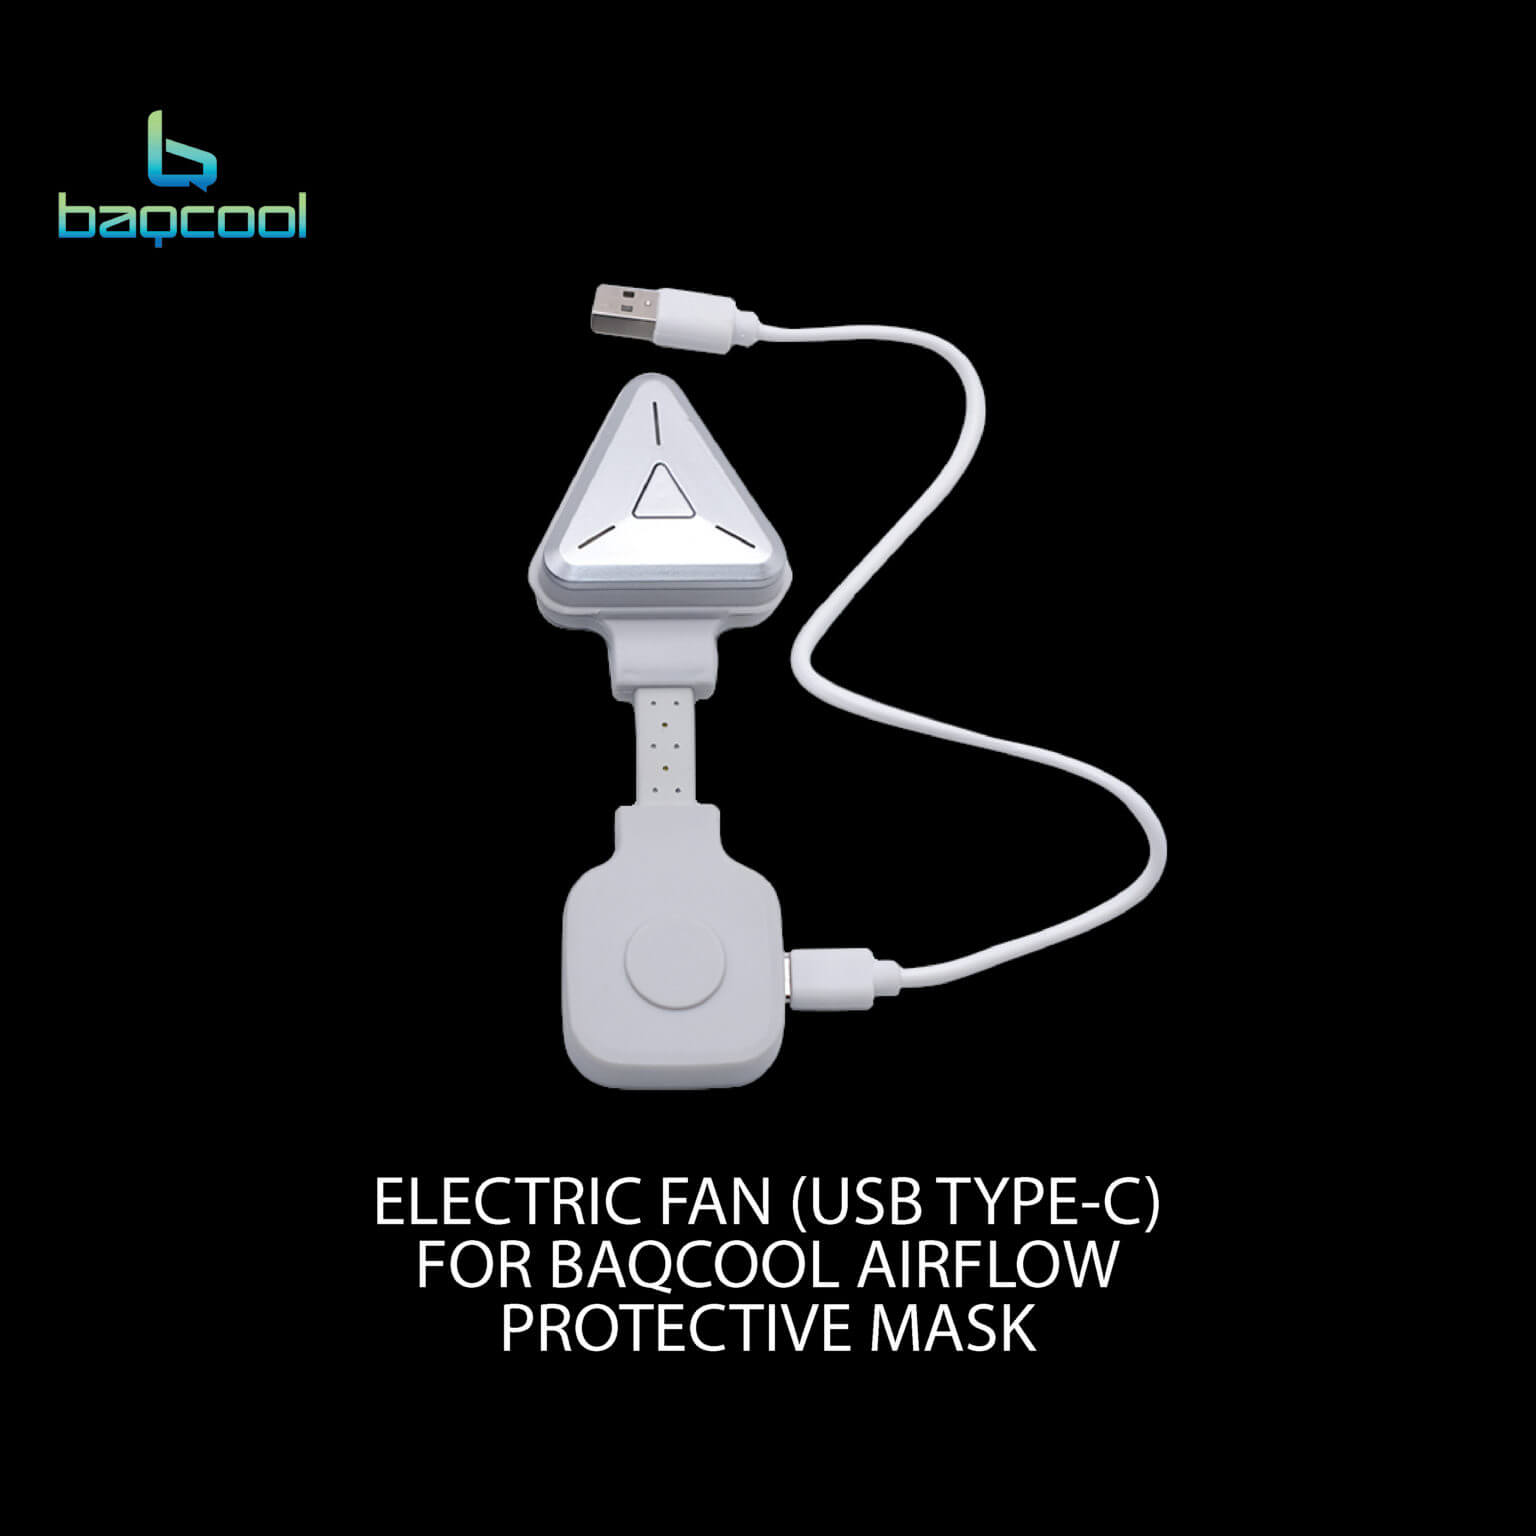 ELECTRIC FAN FOR BAQCOOL AIRFLOW PROTECTIVE MASK